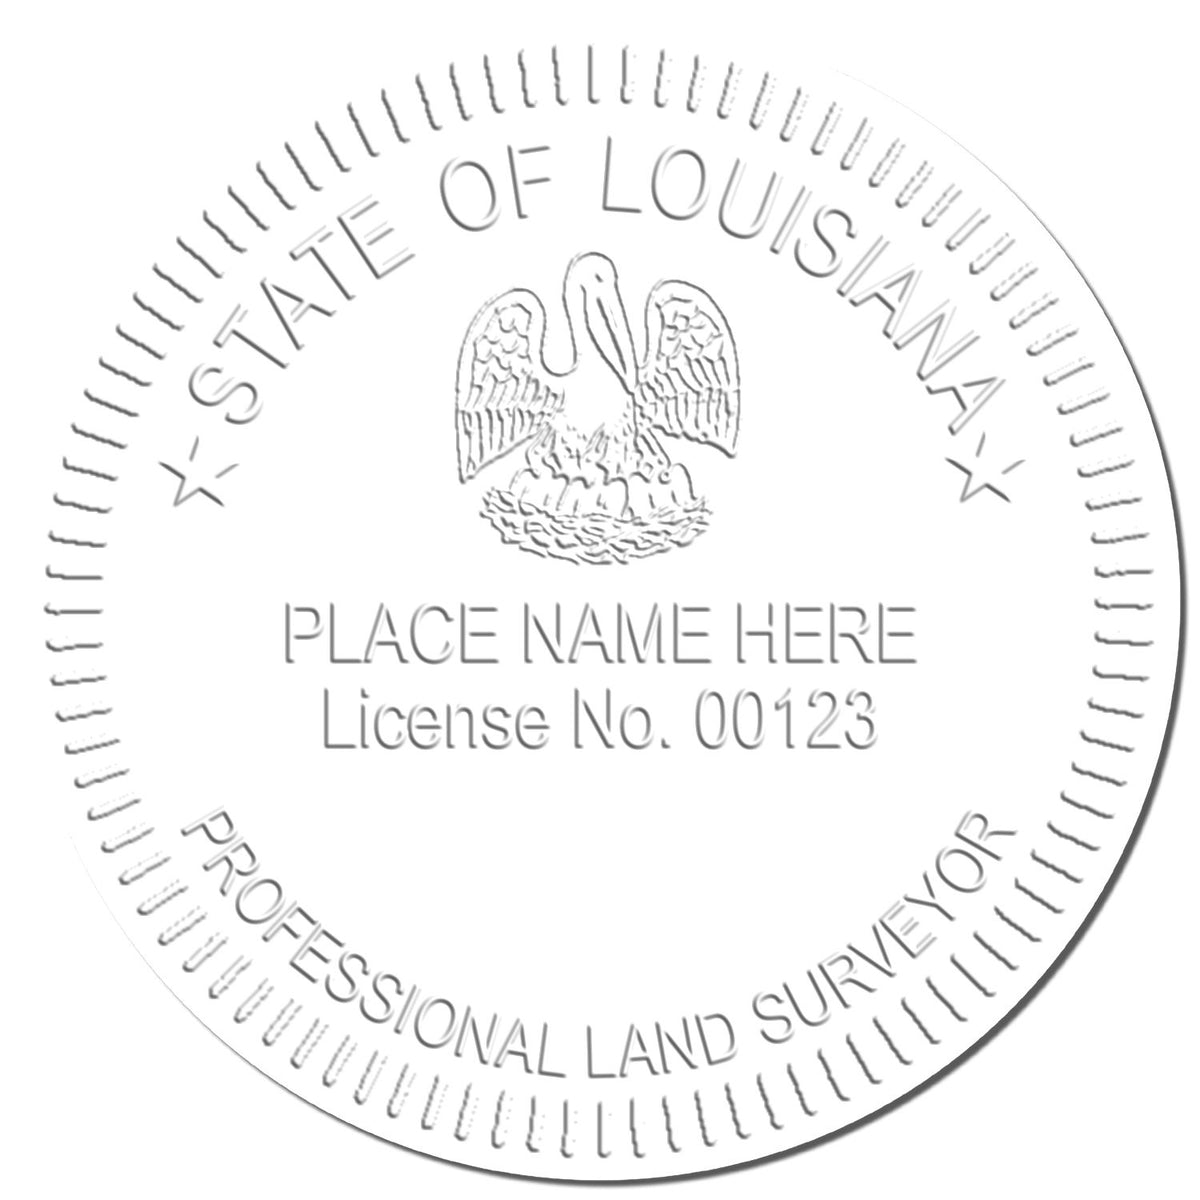 This paper is stamped with a sample imprint of the Hybrid Louisiana Land Surveyor Seal, signifying its quality and reliability.